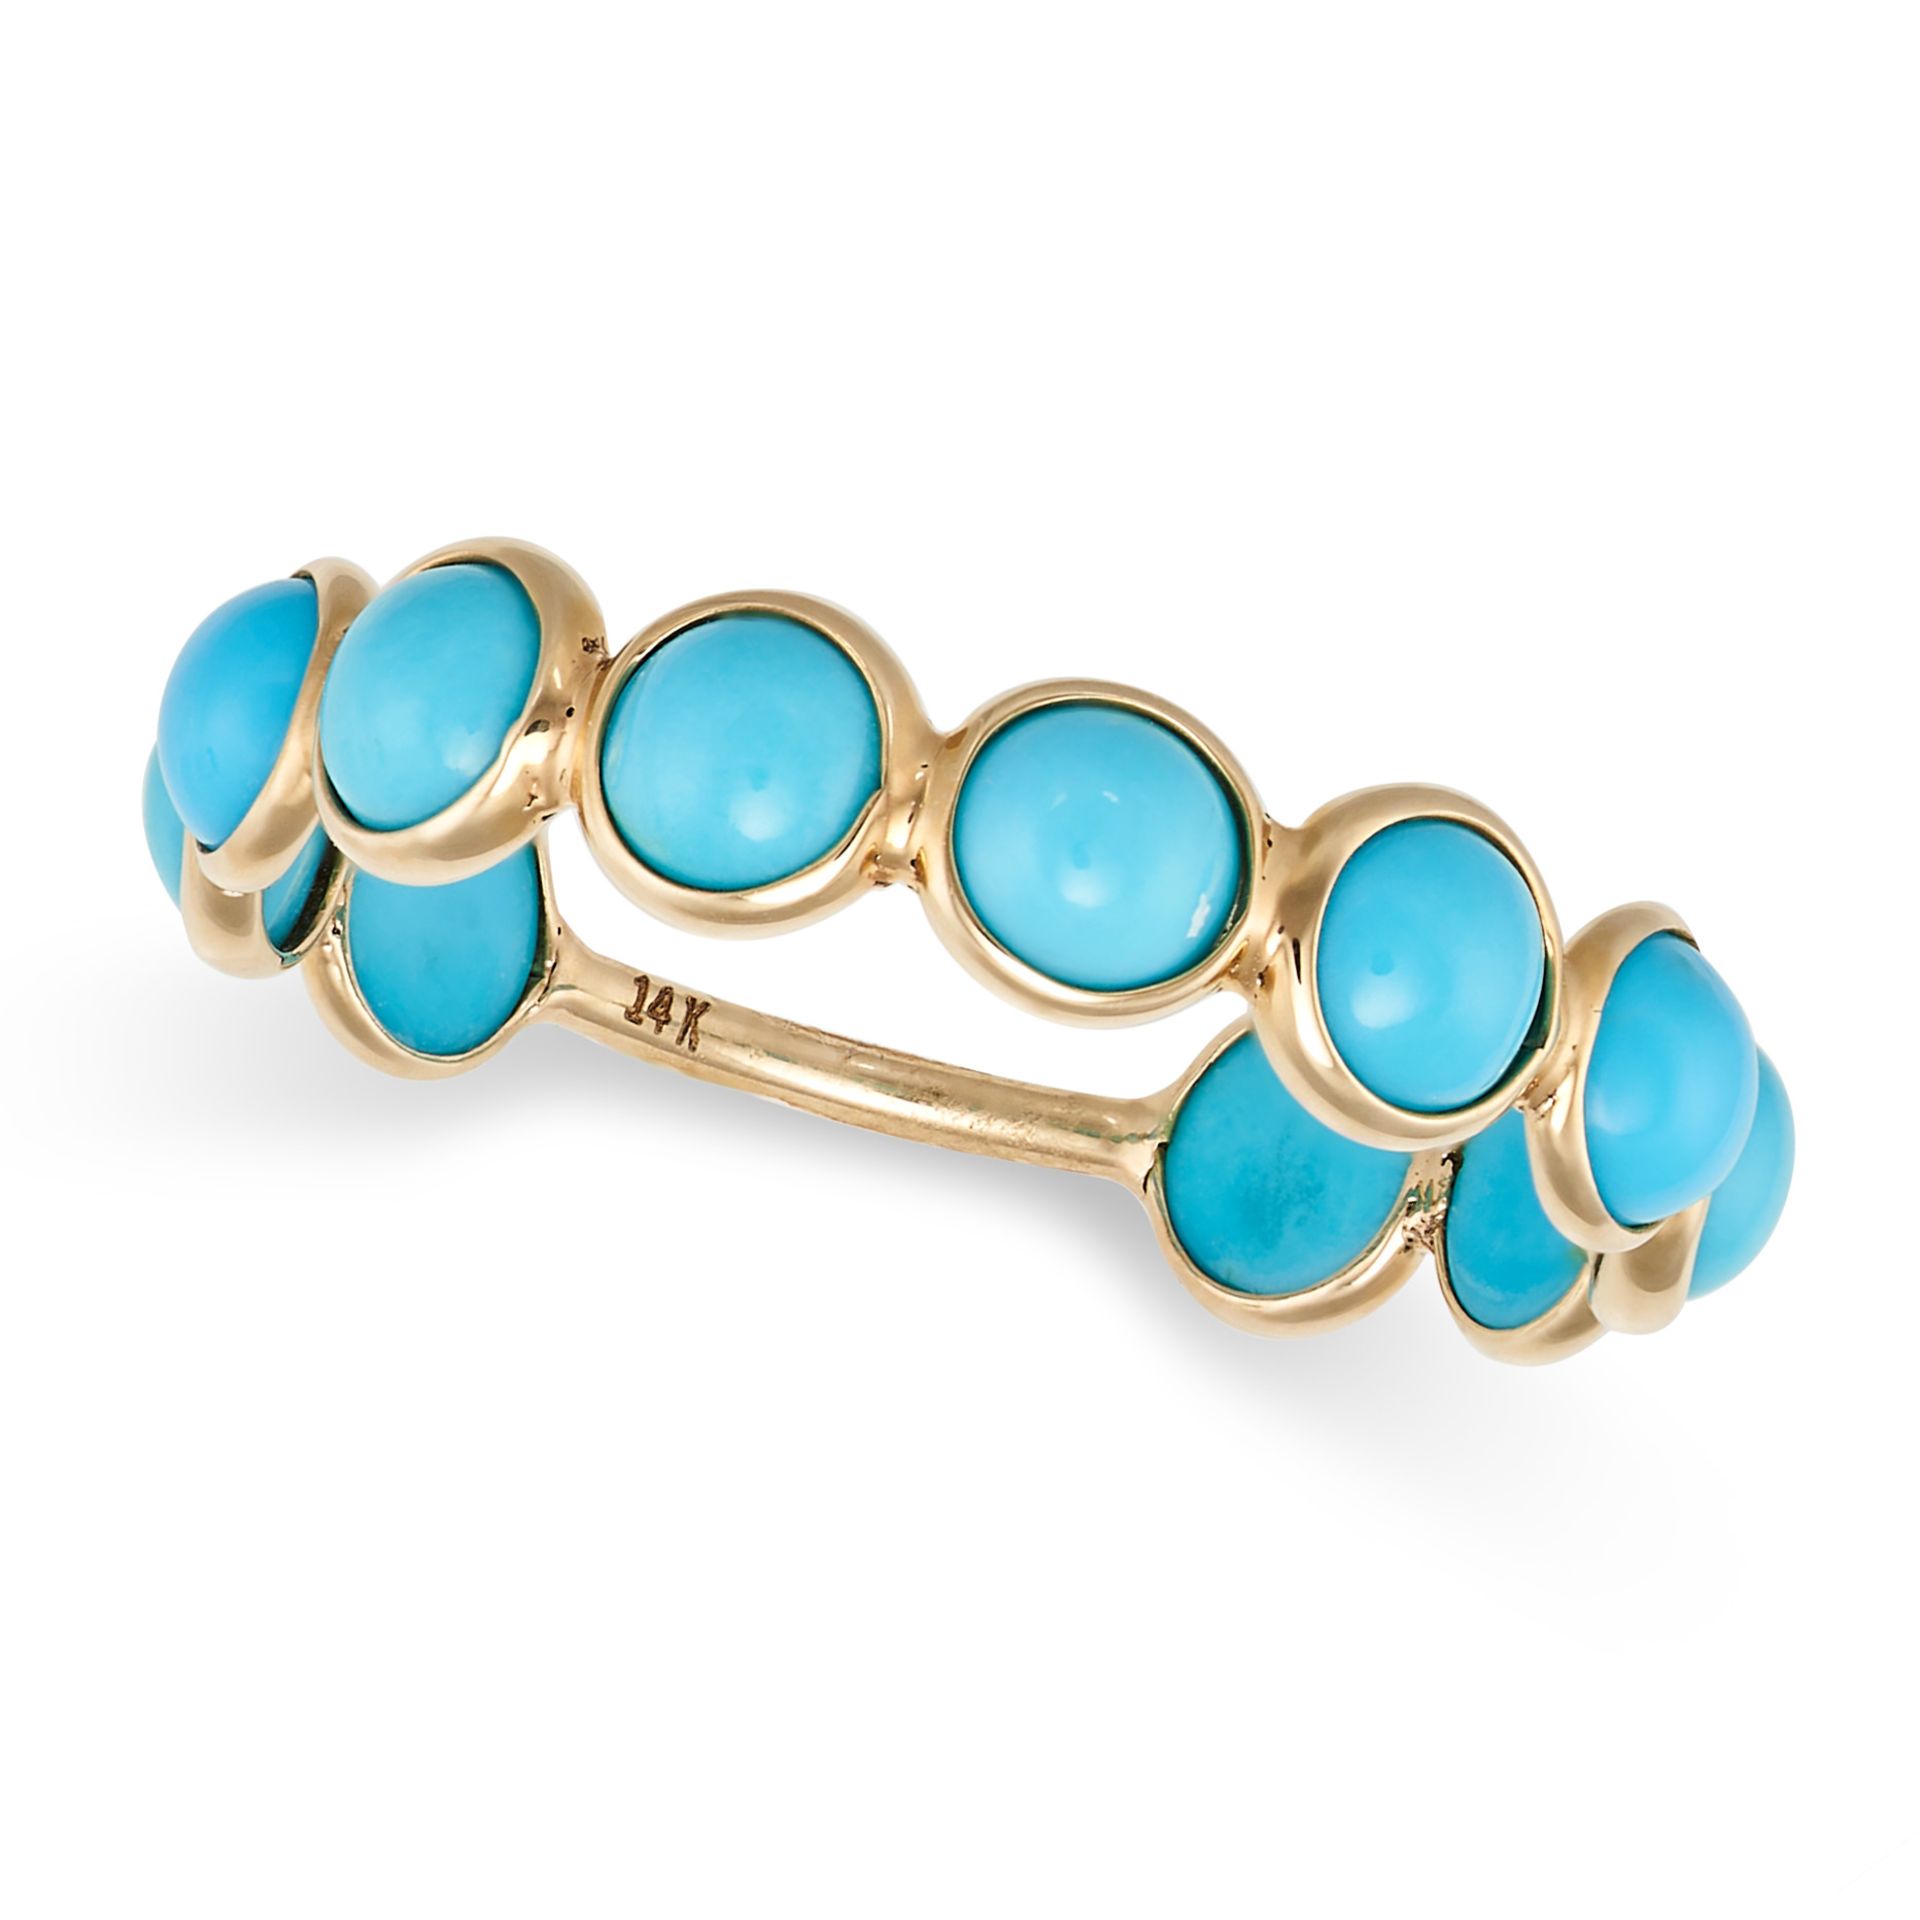 A TURQUOISE ETERNITY RING in 14ct yellow gold, set with a row of round cabochon turquoise, stampe...